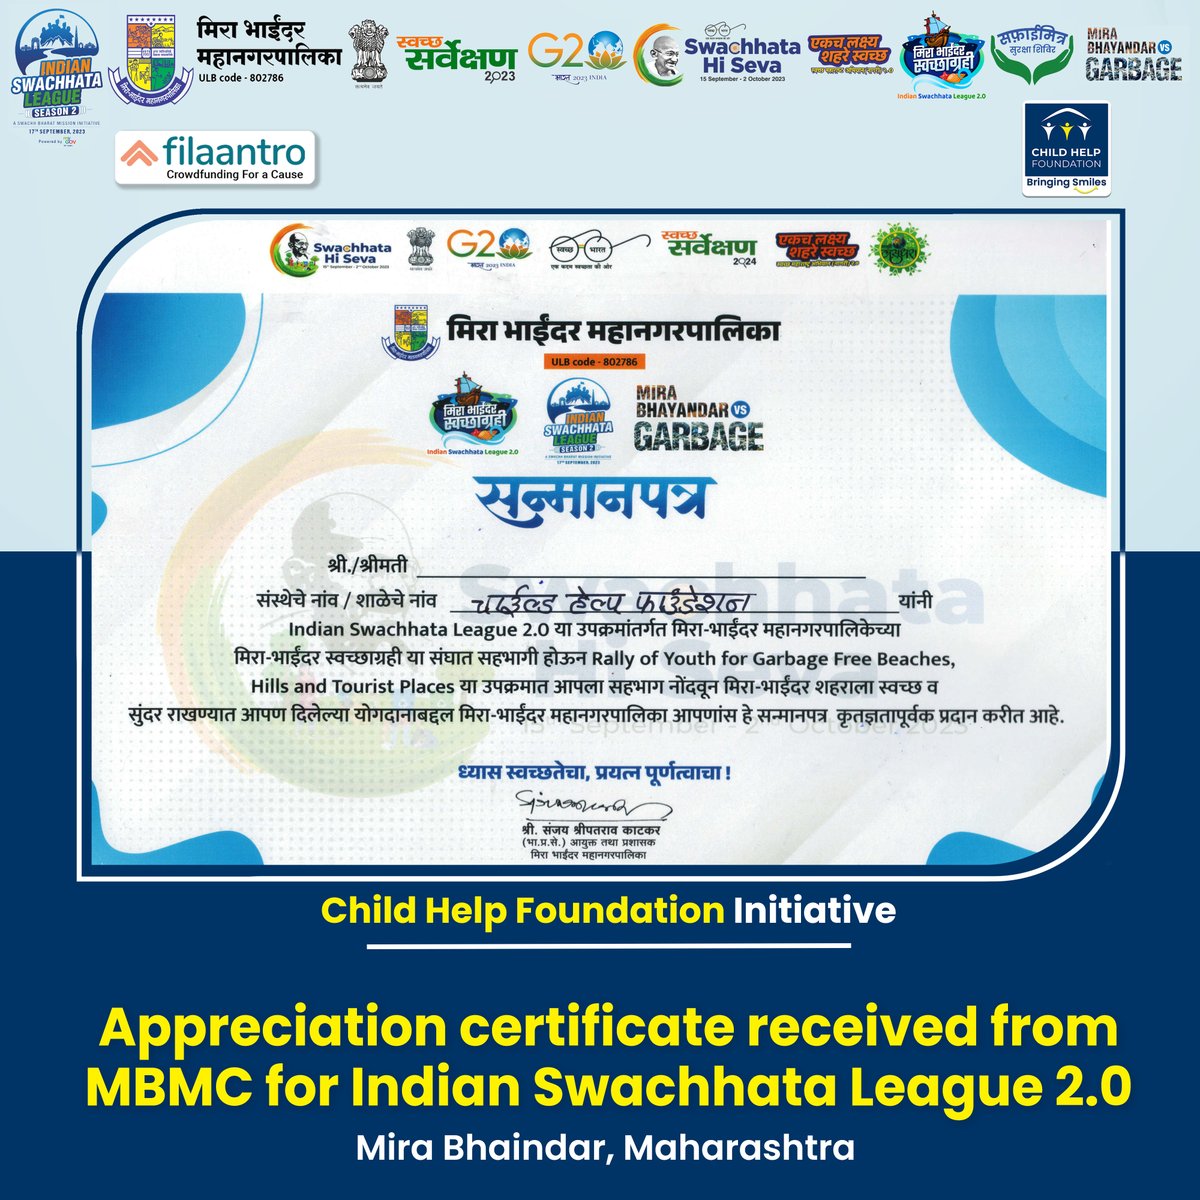 For our efforts during Indian Swachhata League 2.0, Child Help Foundation was awarded an appreciation certificate by Mr. Ravi Pawar, the deputy commissioner of Mira-Bhayander Municipal Corporation.
.
#LetterofAppreciation #IndianSwachhataLeague #GarbageFreeIndia